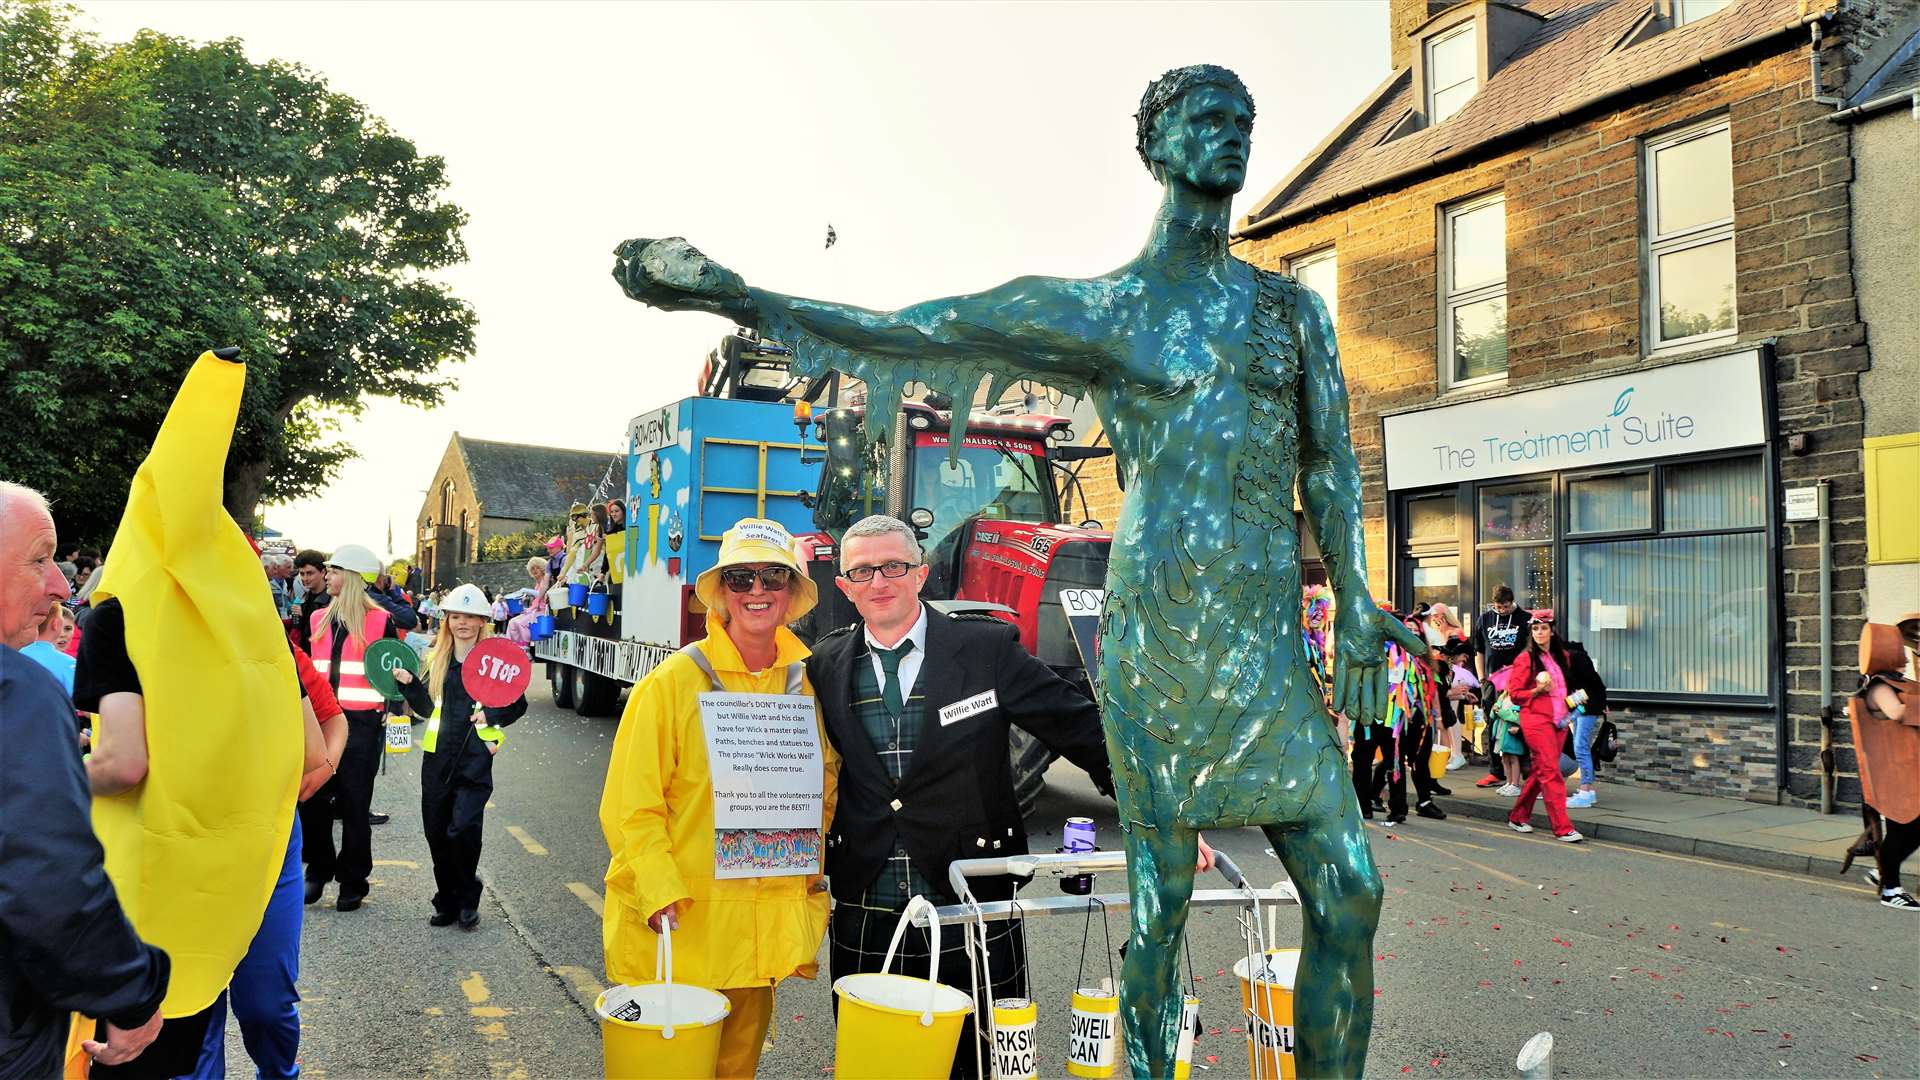 The family of former gala committee member, the late Alex Henderson, won an award with this walking fancy dress at the annual street parade. Alex's son Andrew dressed as Willie Watt and had on his dad’s tartan trousers which Alex had worn for many years when he escorted the gala queen to the stage. 'It was like having him still involved with gala and looking down on us to make sure we were doing it right,' said a family member. Picture: DGS